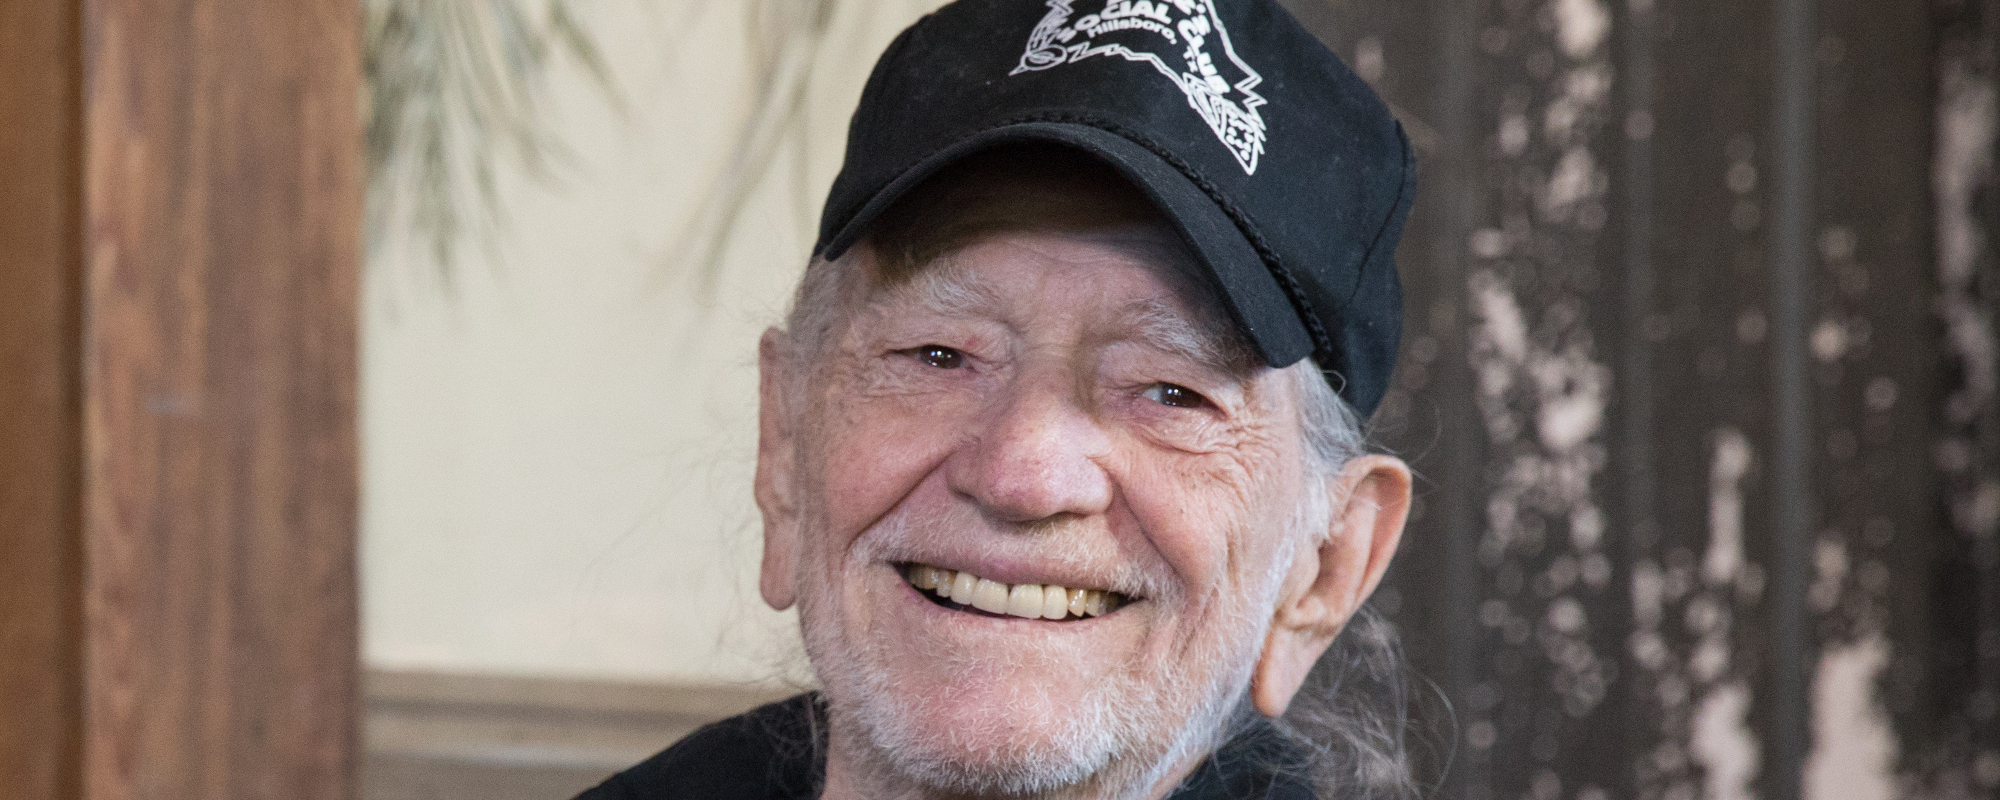 Willie Nelson Reveals How His Ex-Wife Learned About Affair Thanks to a Hospital Bill